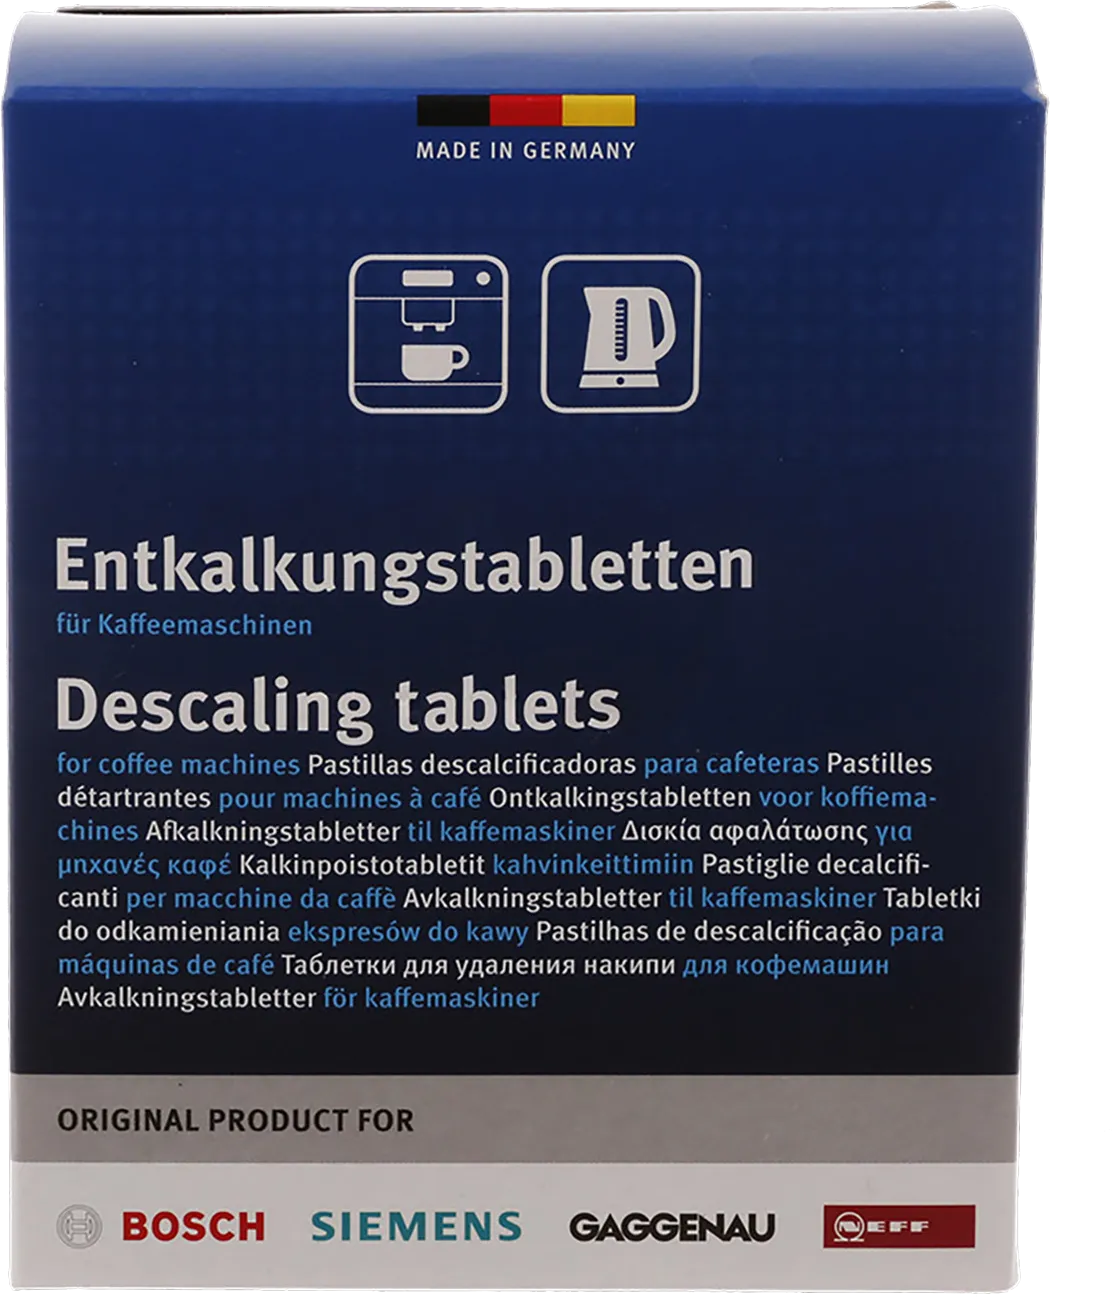 Descaling tablets for coffee machines, kettles and hot water dispensers Contents: 12 x 18g - Sufficient for 3 - 6 treatments 